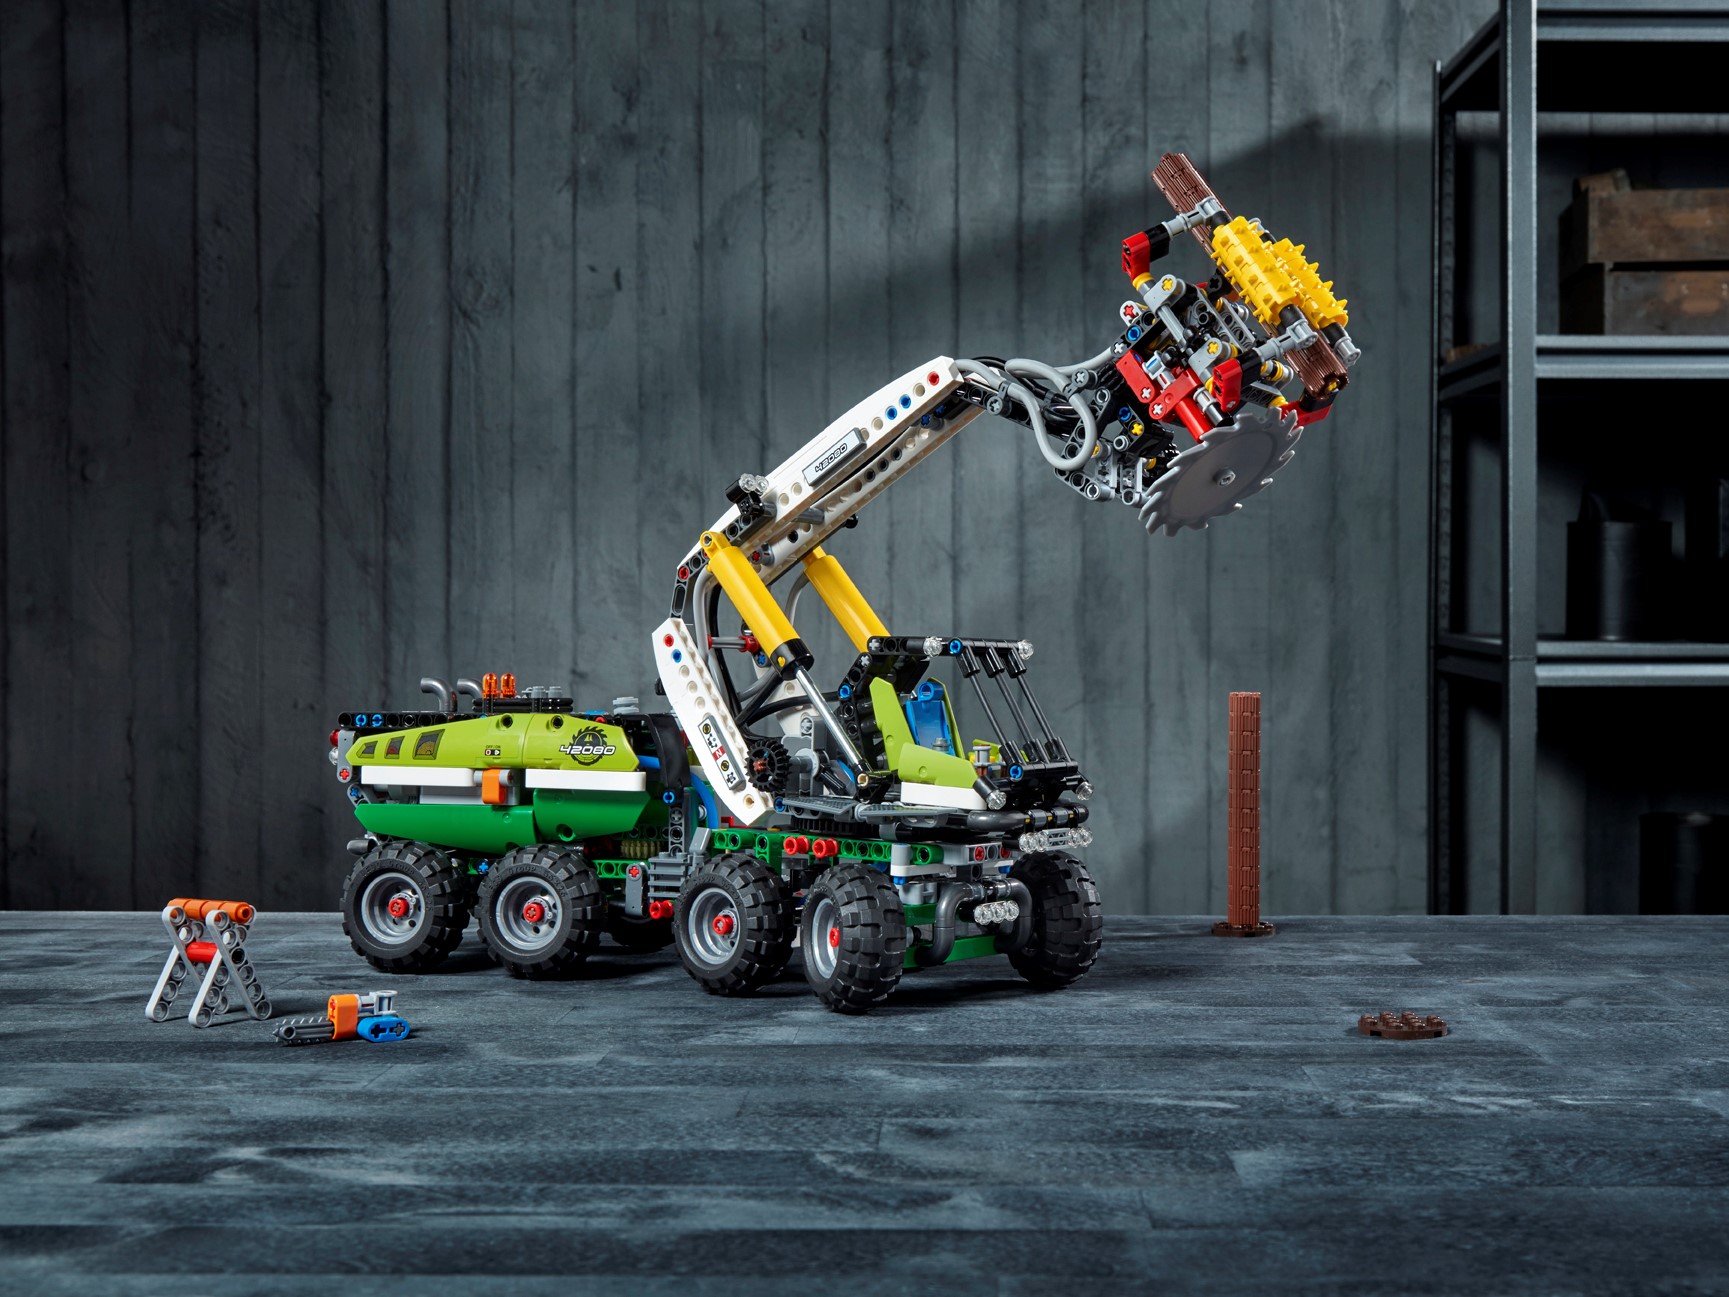 Forest Machine 42080 | Technic™ | Buy online at the Official LEGO 